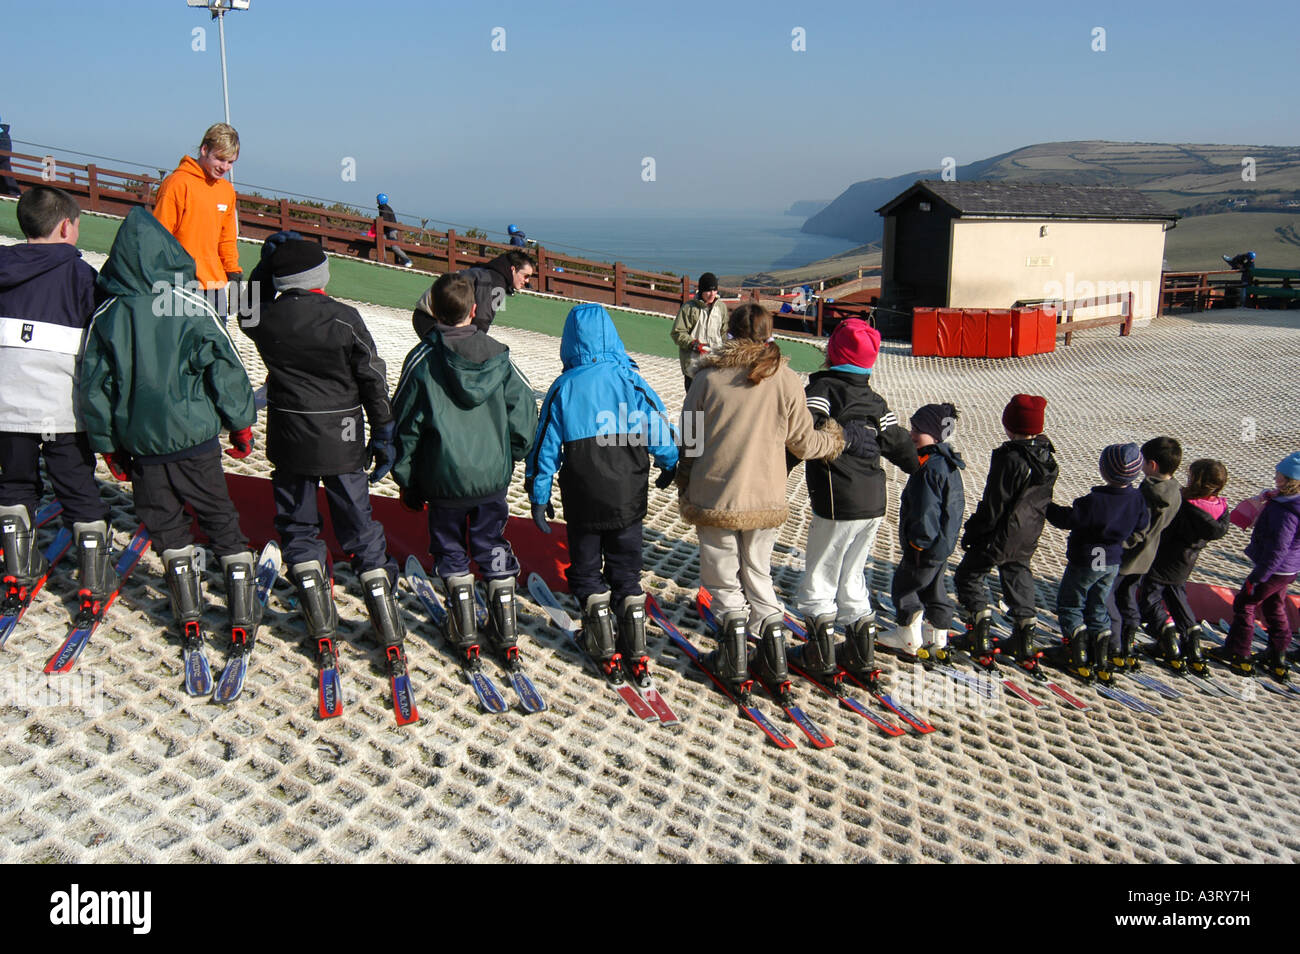 children lined up for skiing lesson on dry artificial ski slope at the Urdd Centre  Llangranog Ceredigion west wales UK Stock Photo